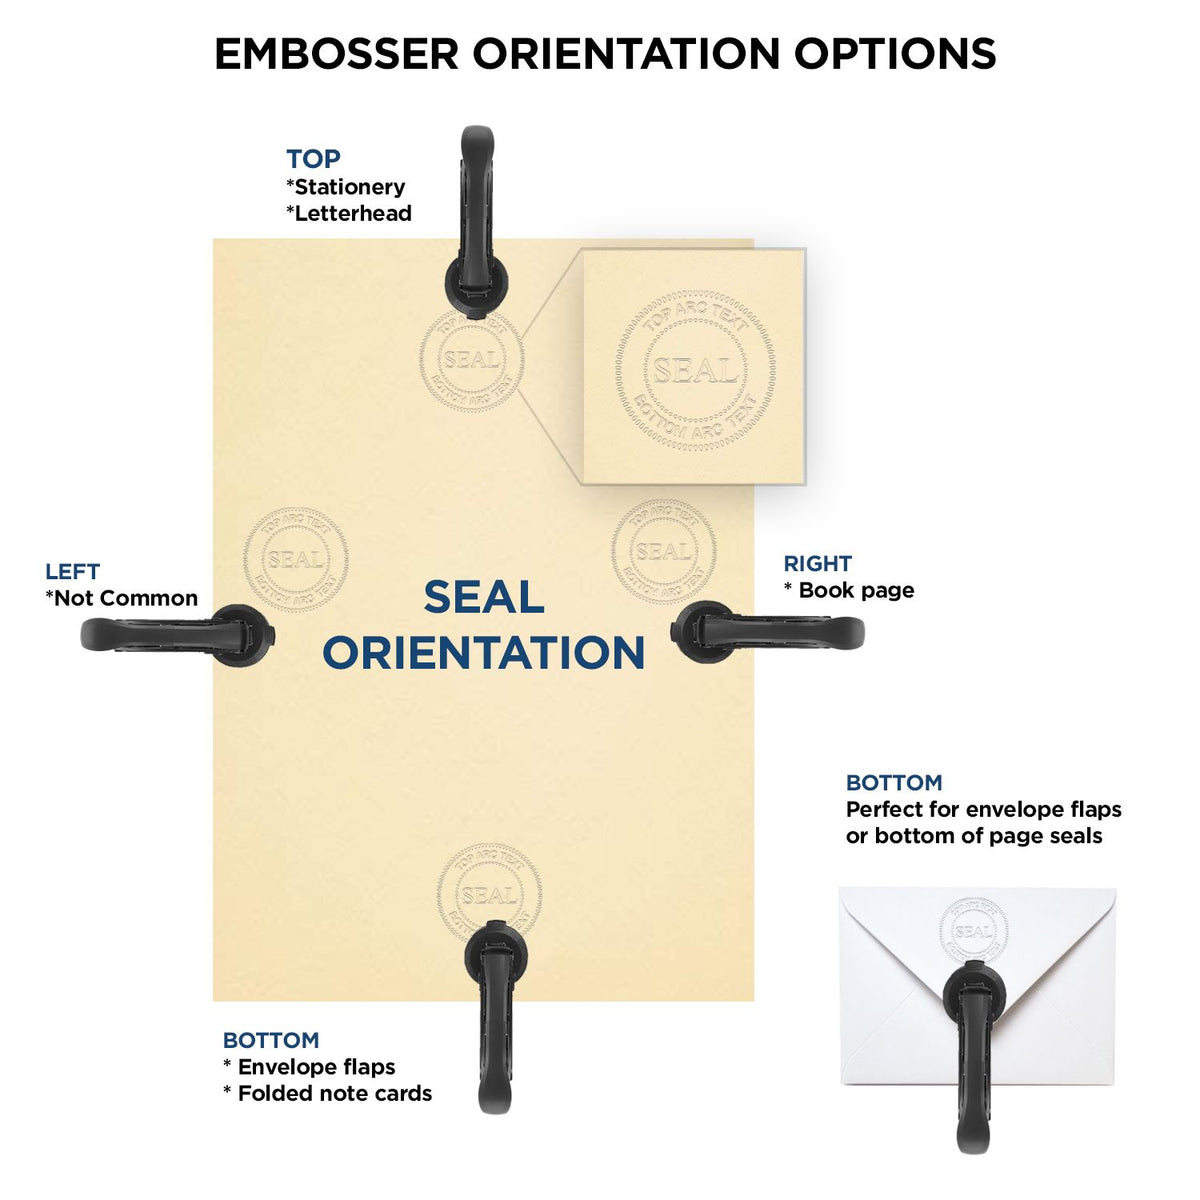 An infographic for the State of Oklahoma Extended Long Reach Engineer Seal showing embosser orientation, this is showing examples of a top, bottom, right and left insert.